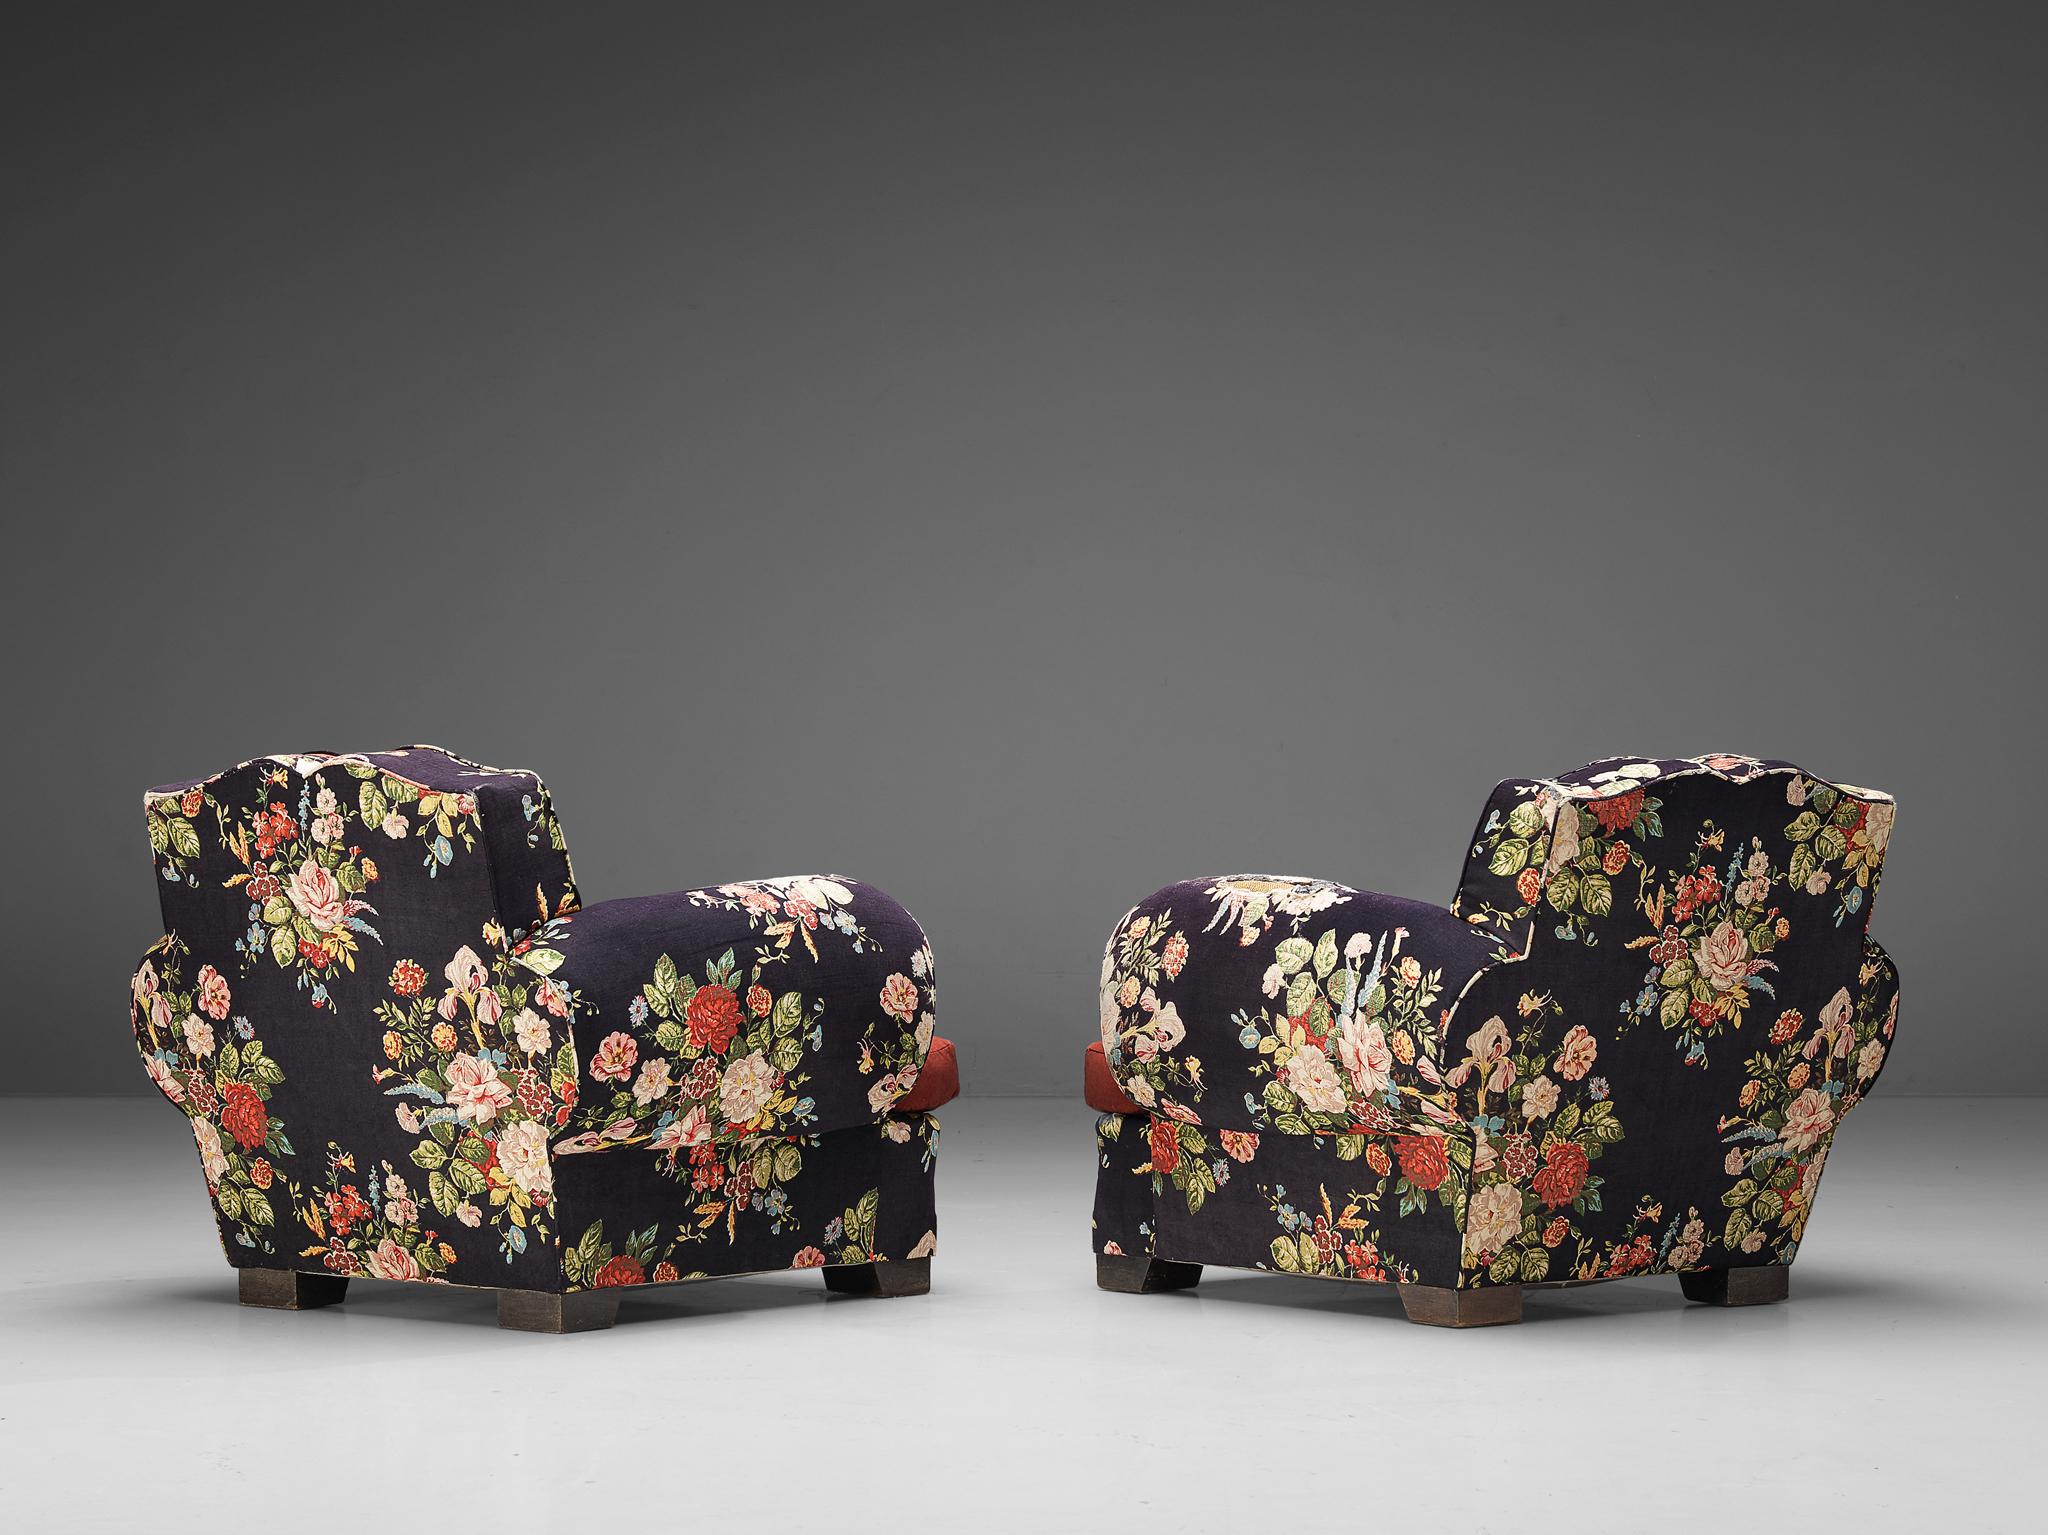 French Art Deco Pair of Lounge Chairs in Floral Upholstery  For Sale 2